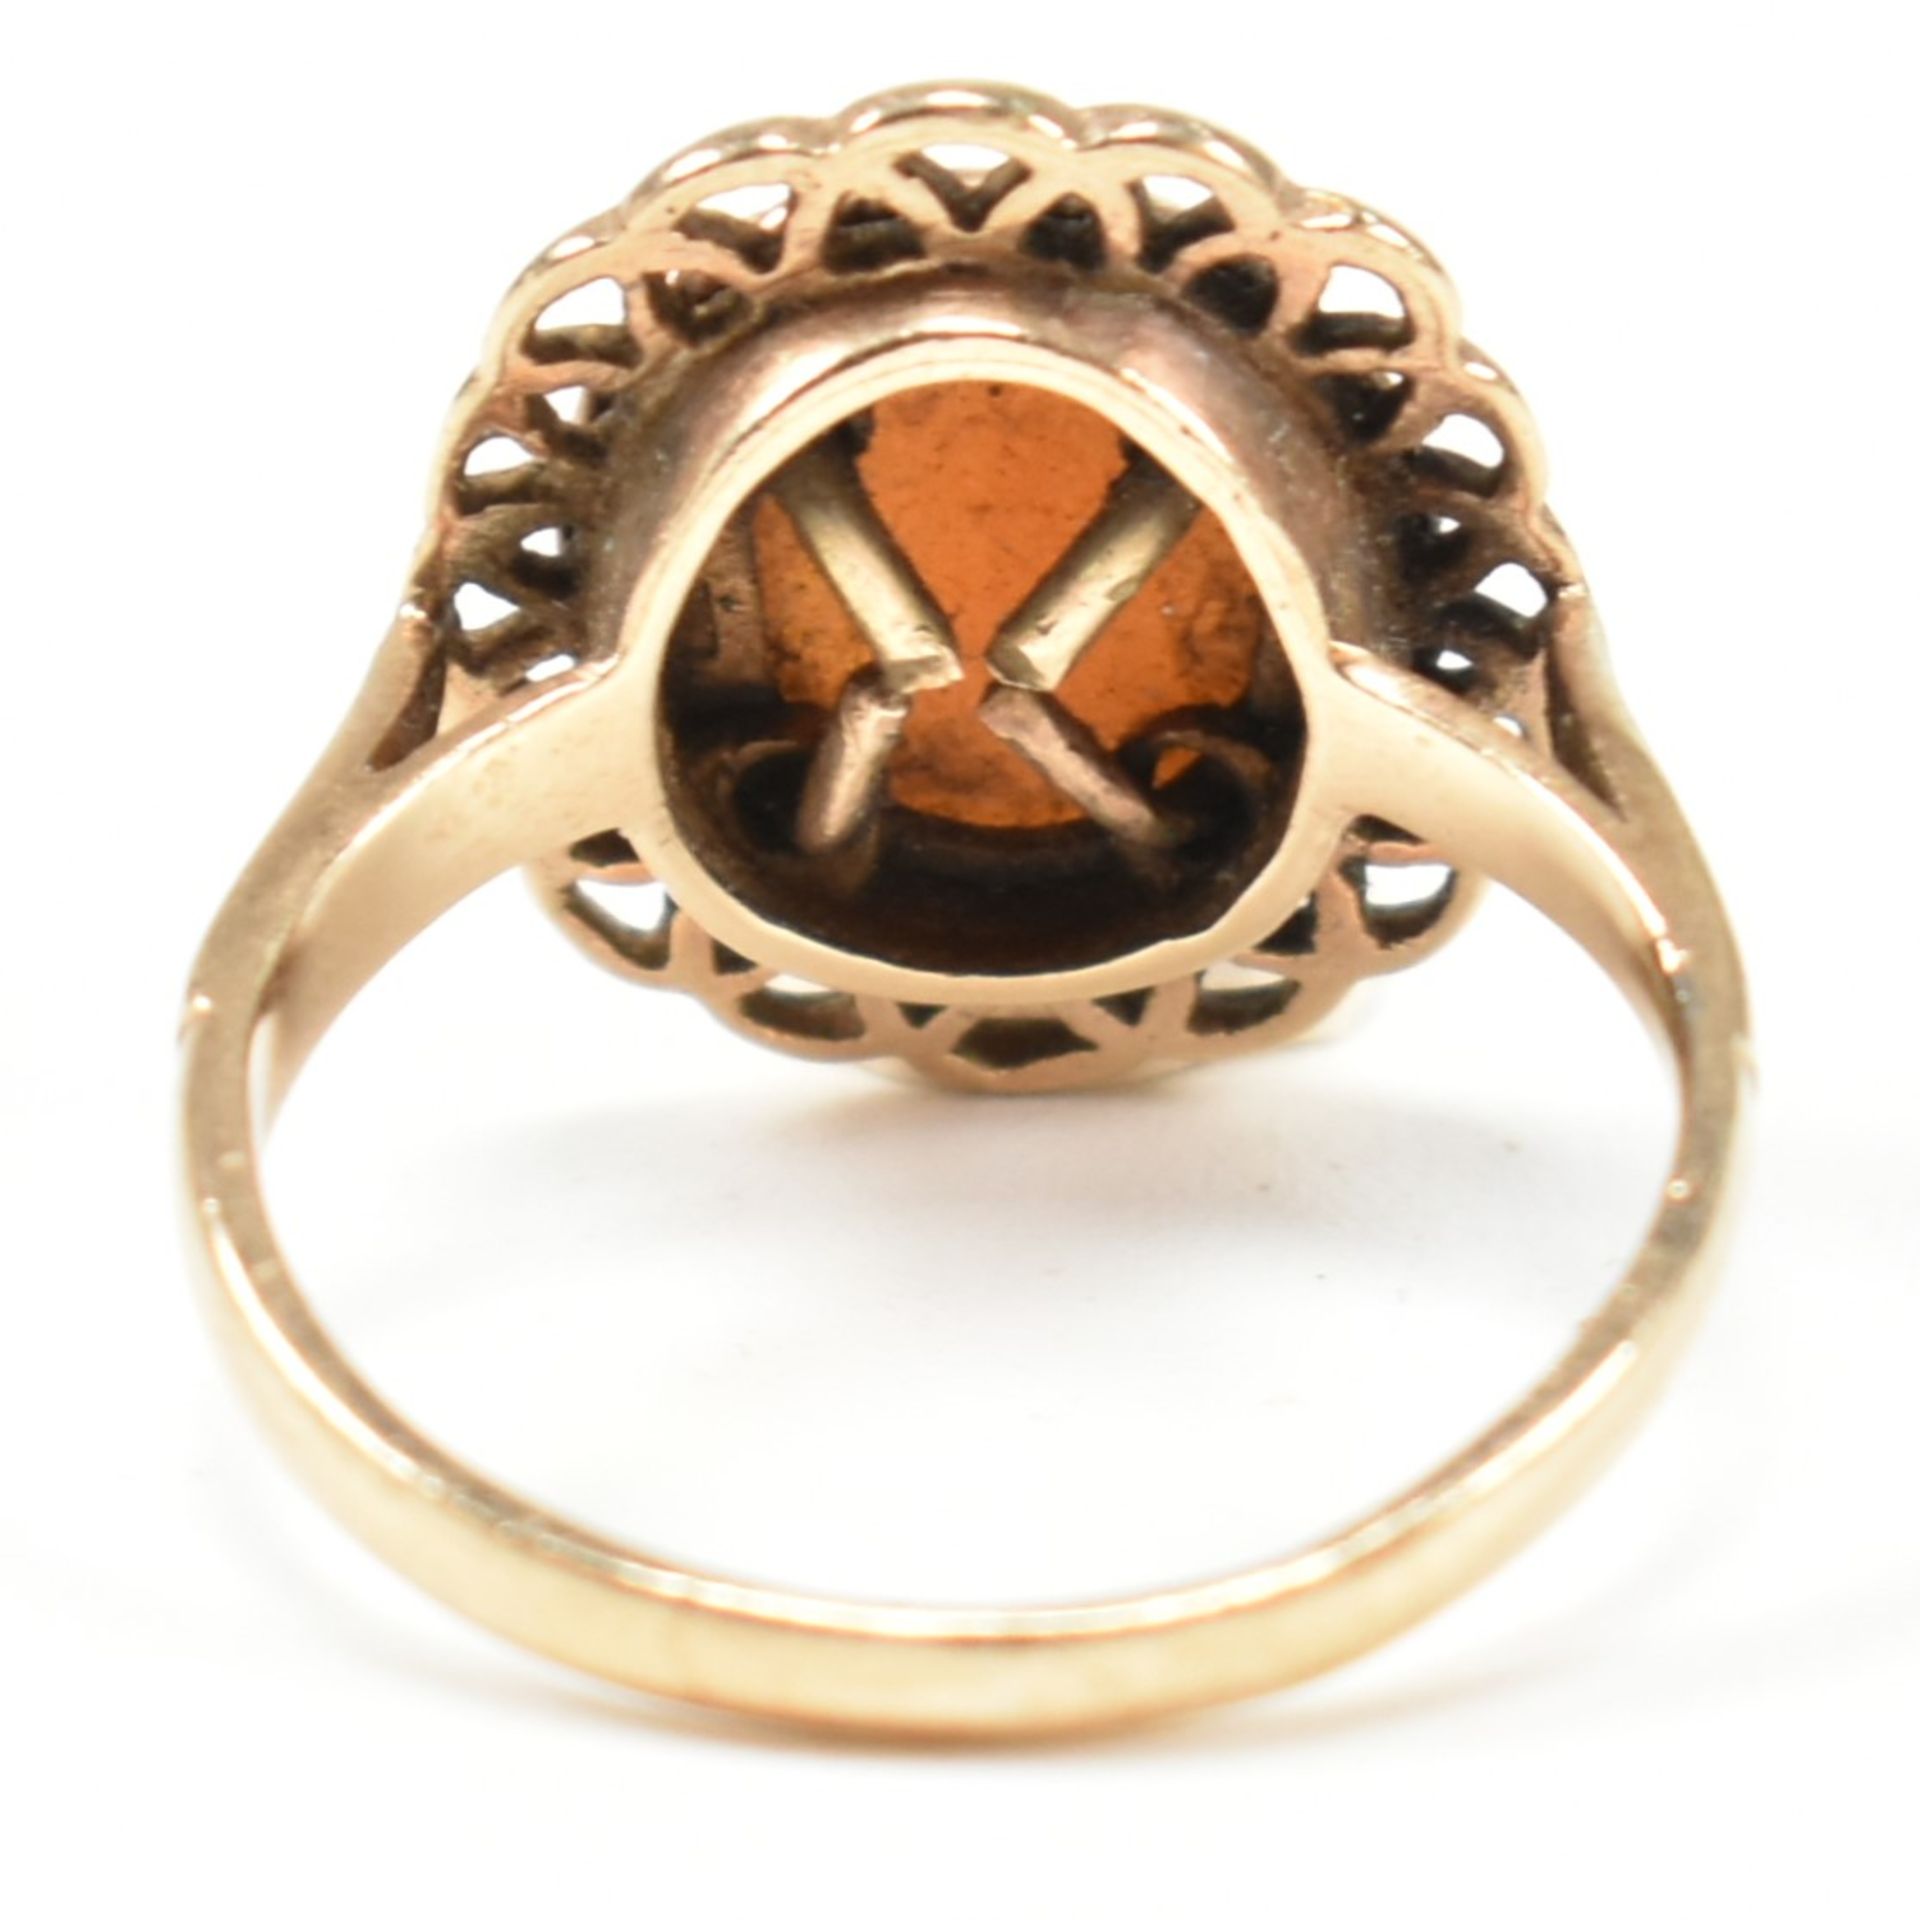 HALLMARKED 9CT GOLD & CARVED SHELL CAMEO RING - Image 2 of 8